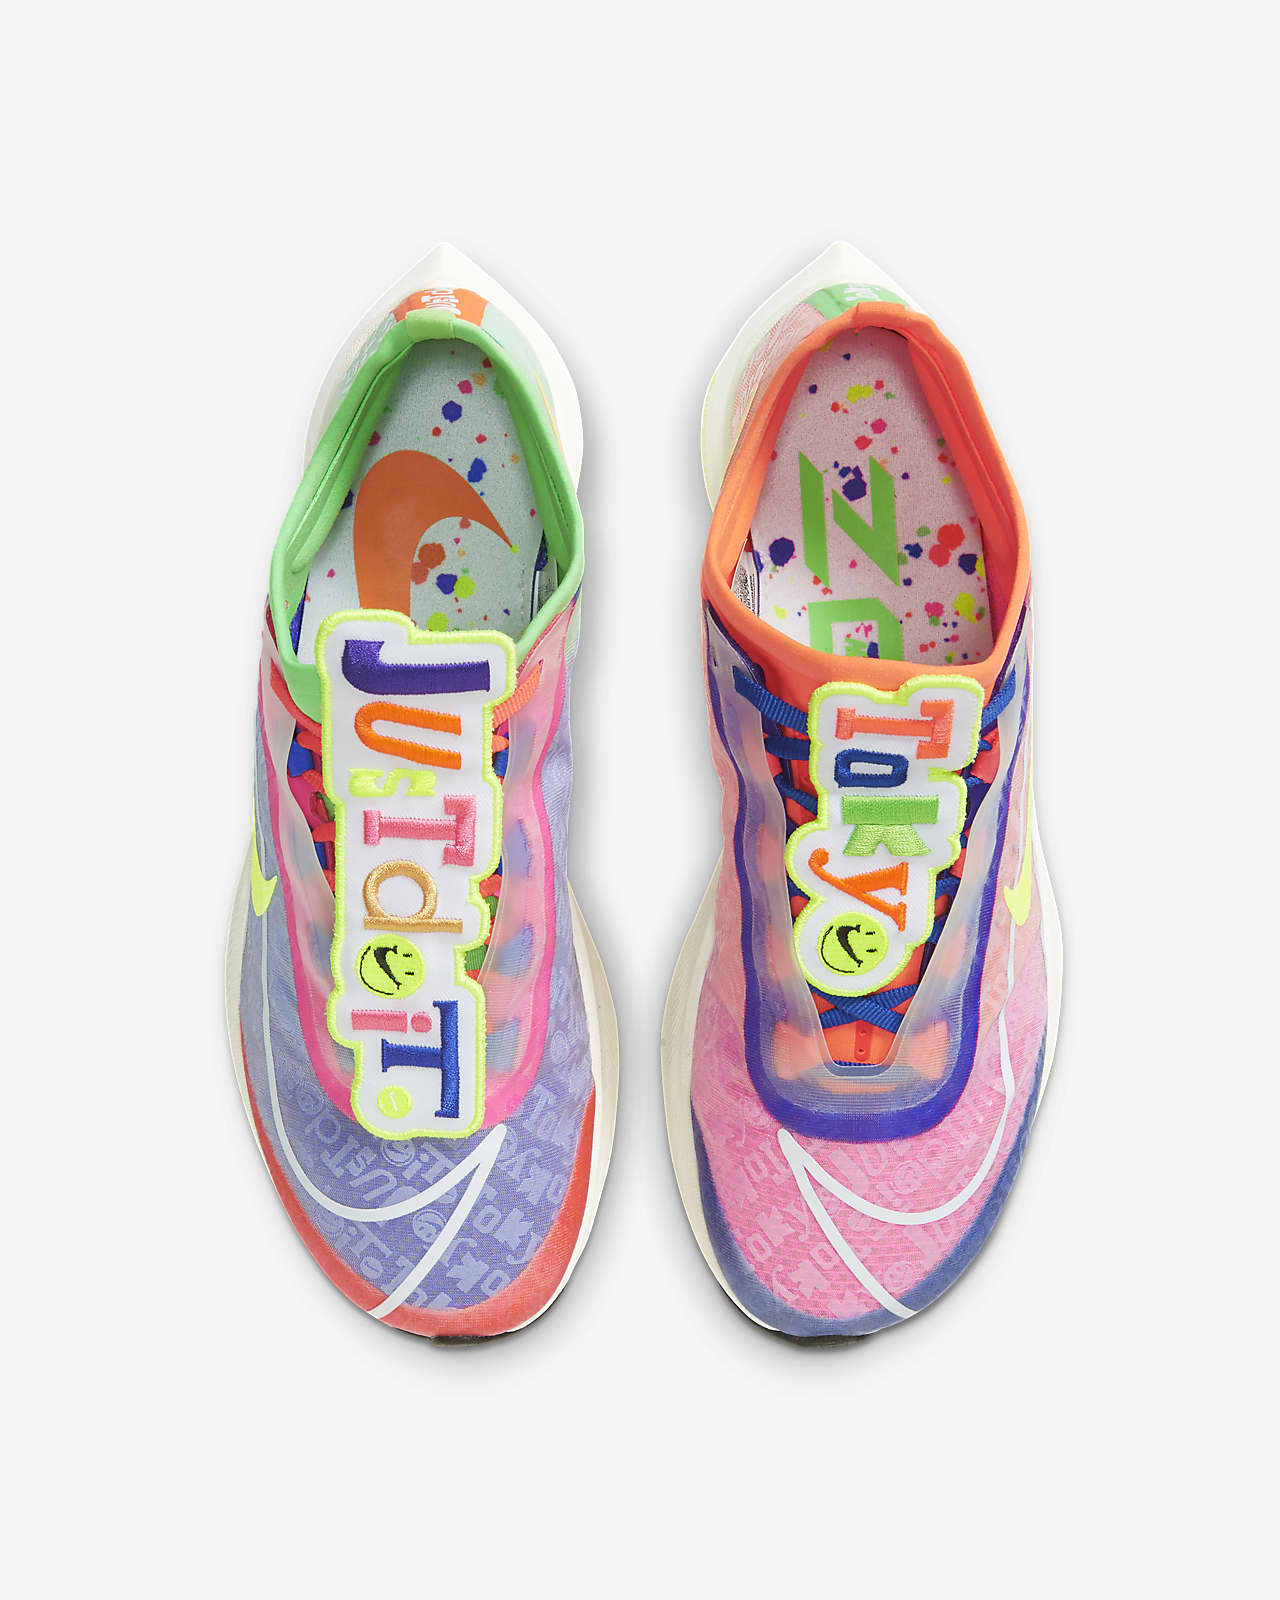 womens nike shoes multi color